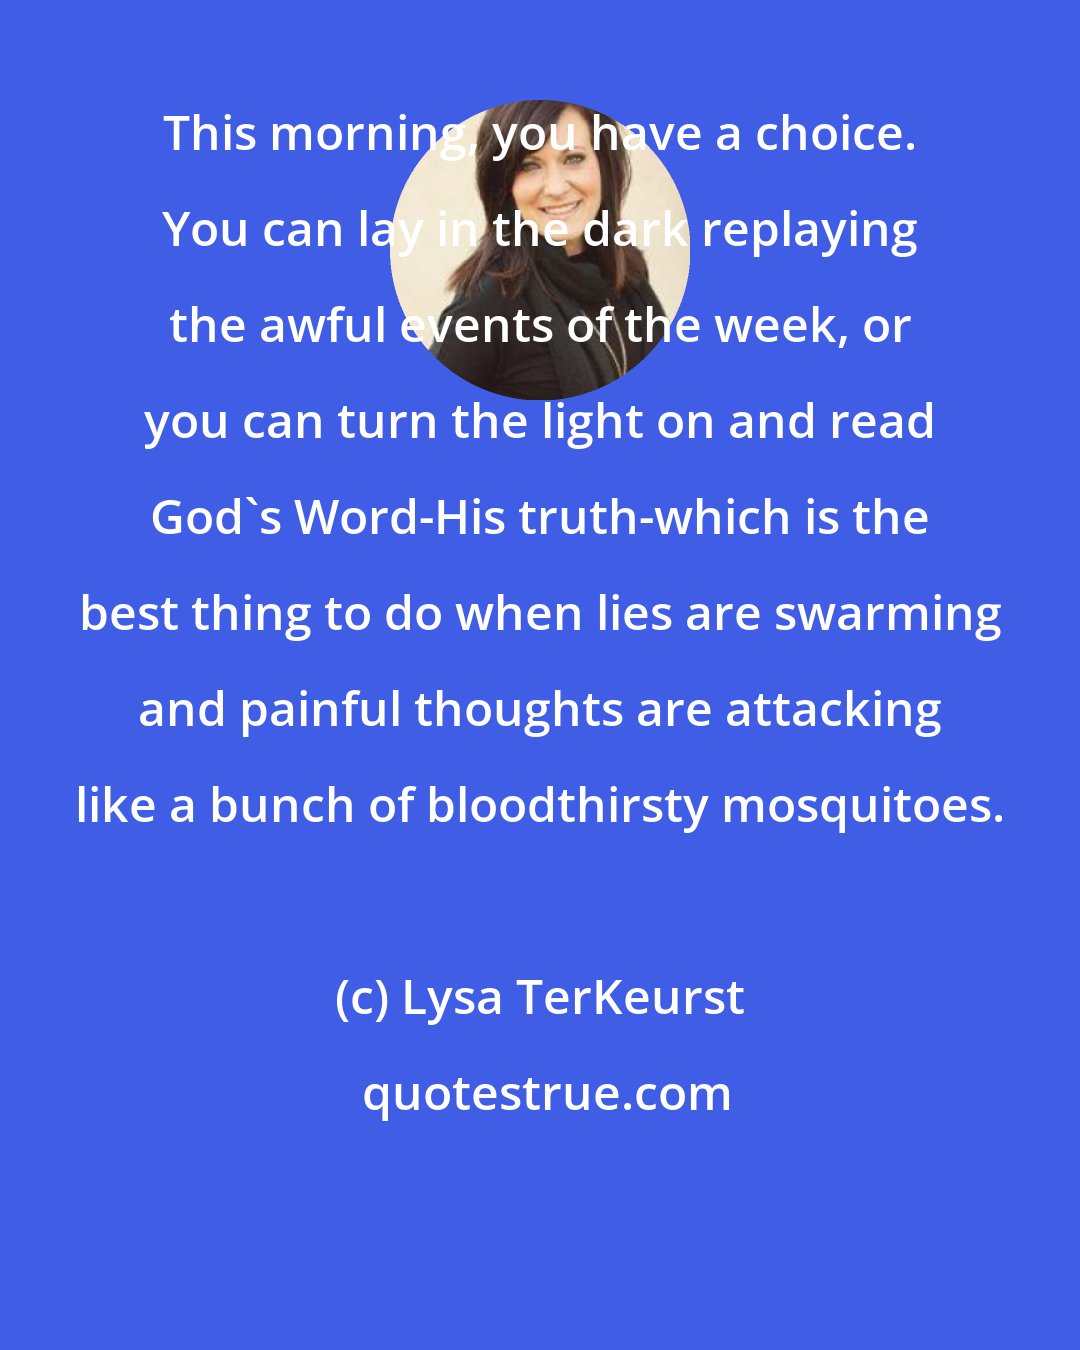 Lysa TerKeurst: This morning, you have a choice. You can lay in the dark replaying the awful events of the week, or you can turn the light on and read God's Word-His truth-which is the best thing to do when lies are swarming and painful thoughts are attacking like a bunch of bloodthirsty mosquitoes.